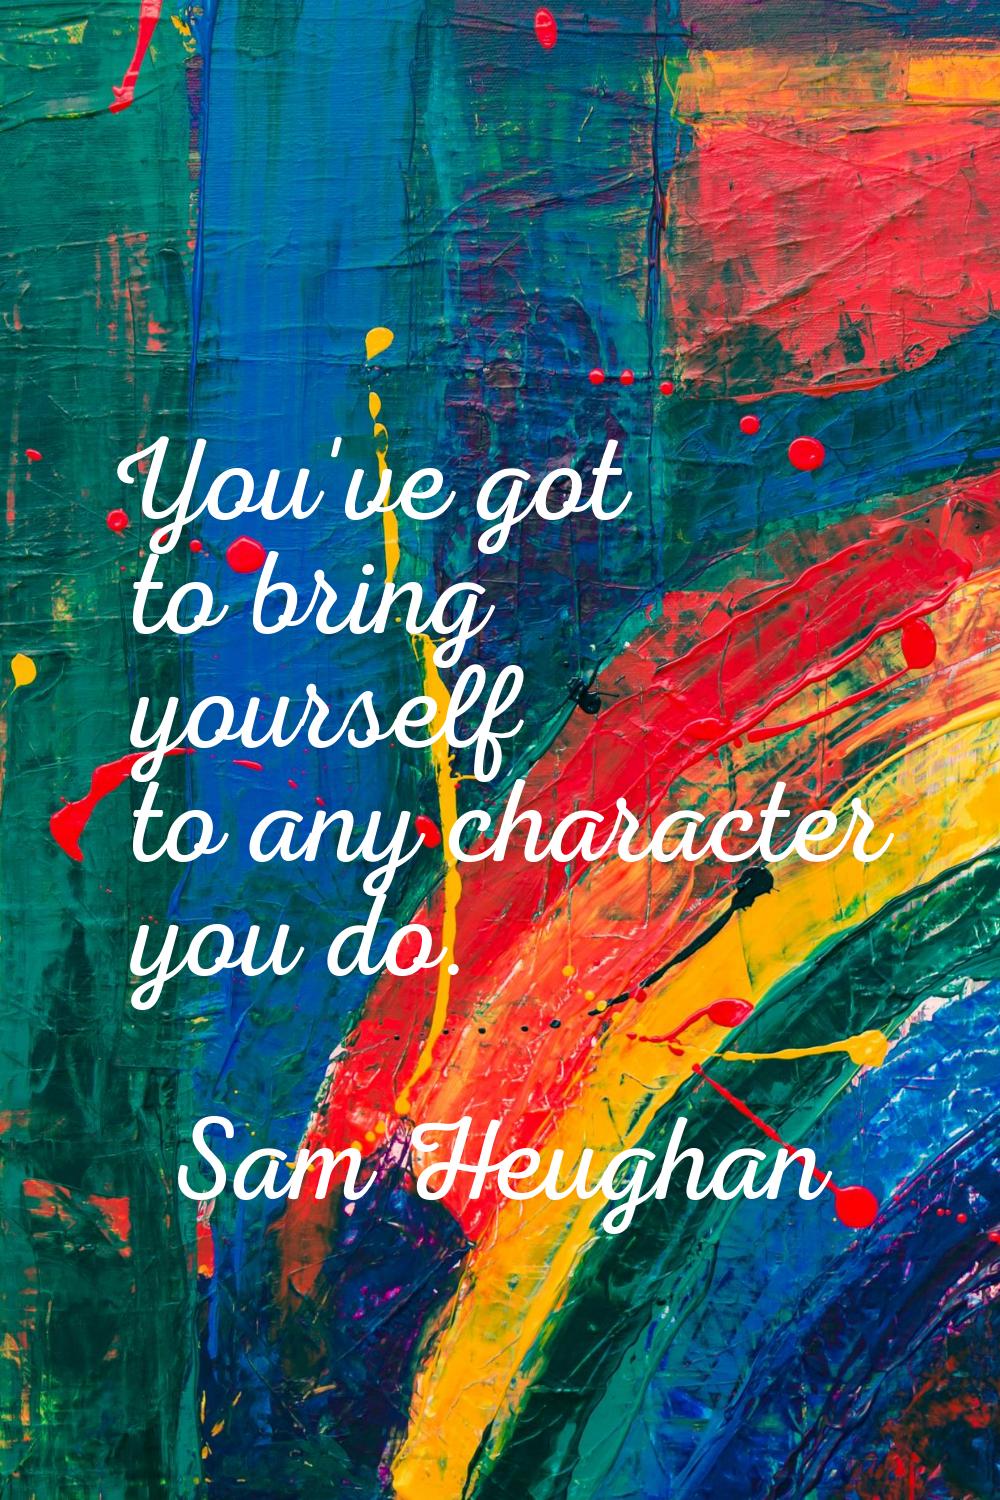 You've got to bring yourself to any character you do.